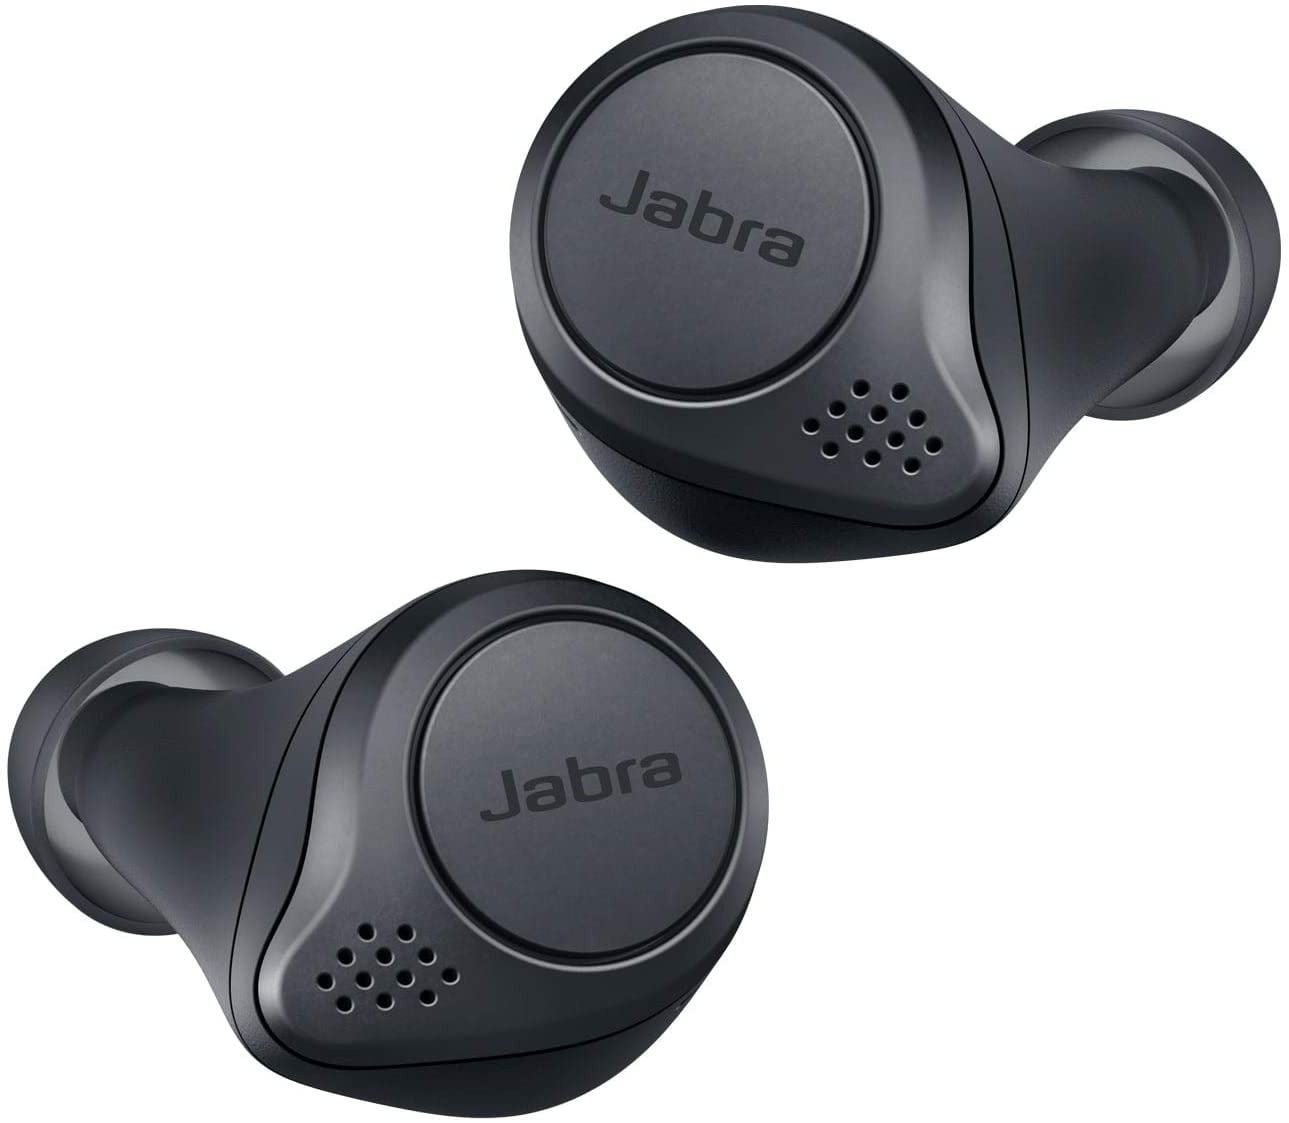 Jabra Elite Active 75t Earbuds – Active Noise Cancelling True Wireless Life for Calls and Music – Titanium Black